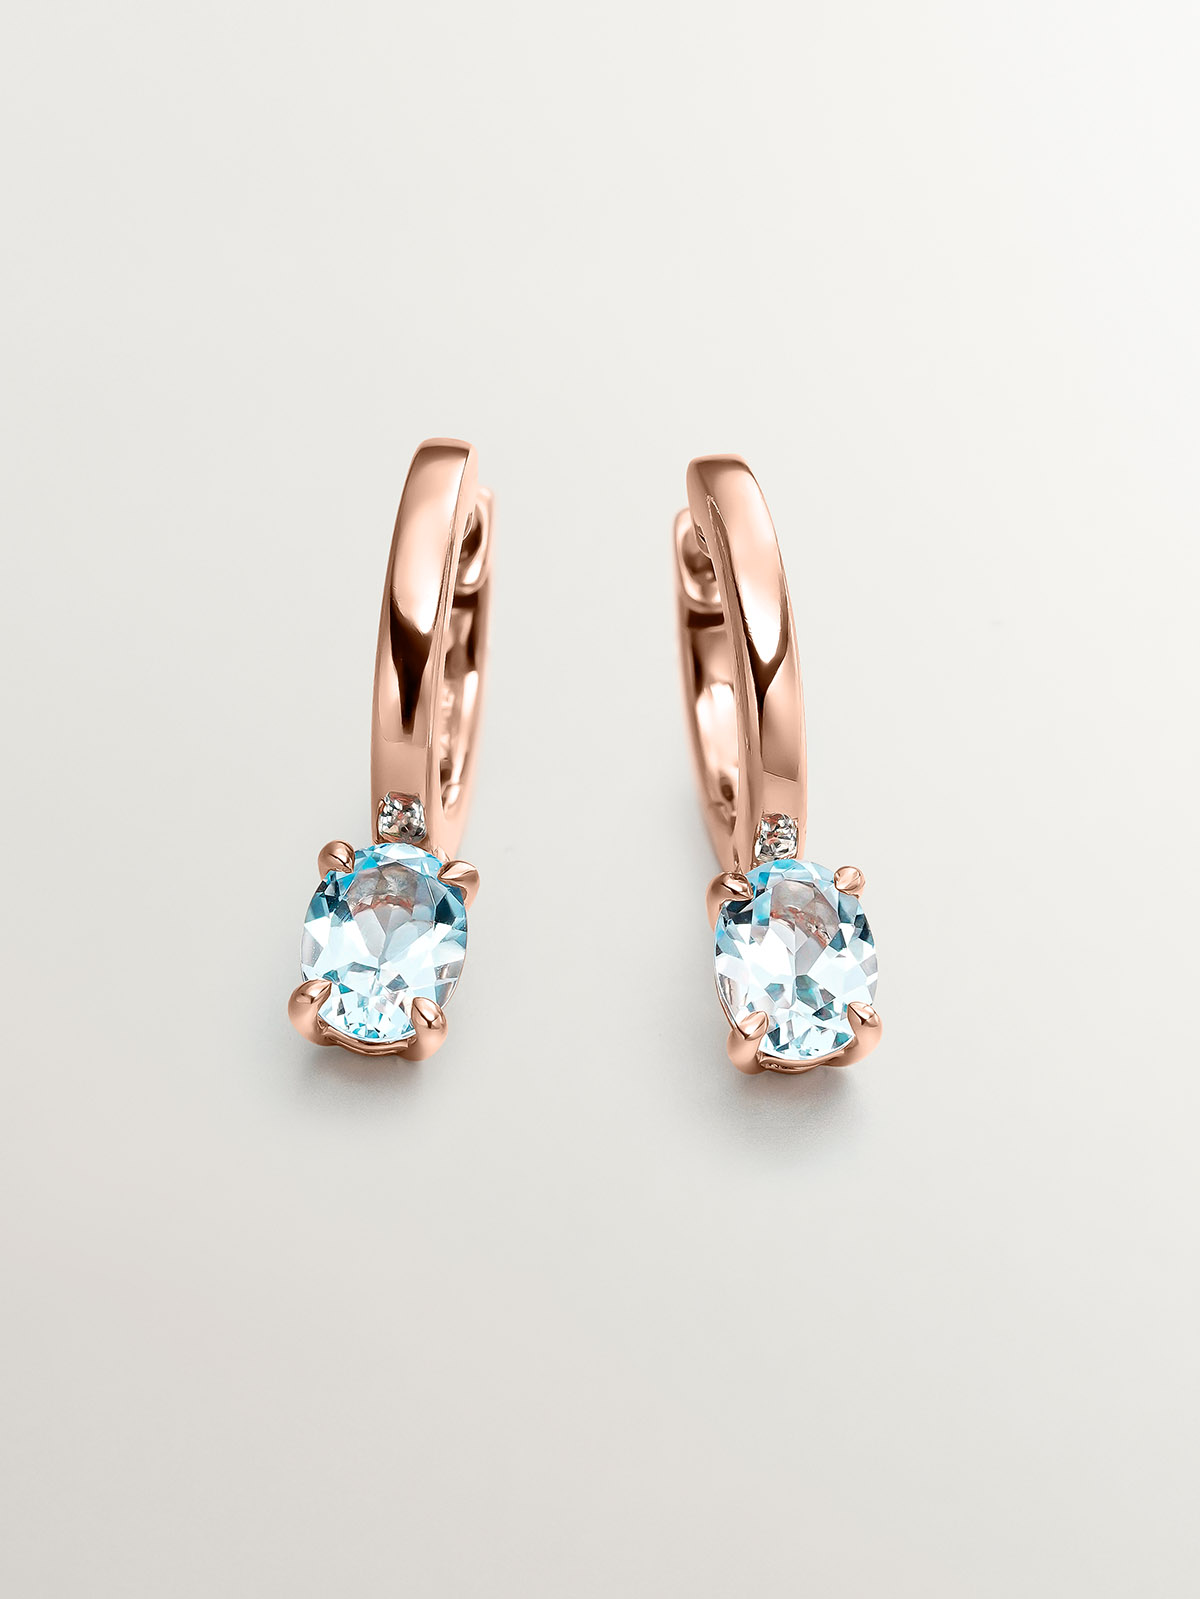 925 Silver earrings bathed in 18K rose gold with sky blue topaz